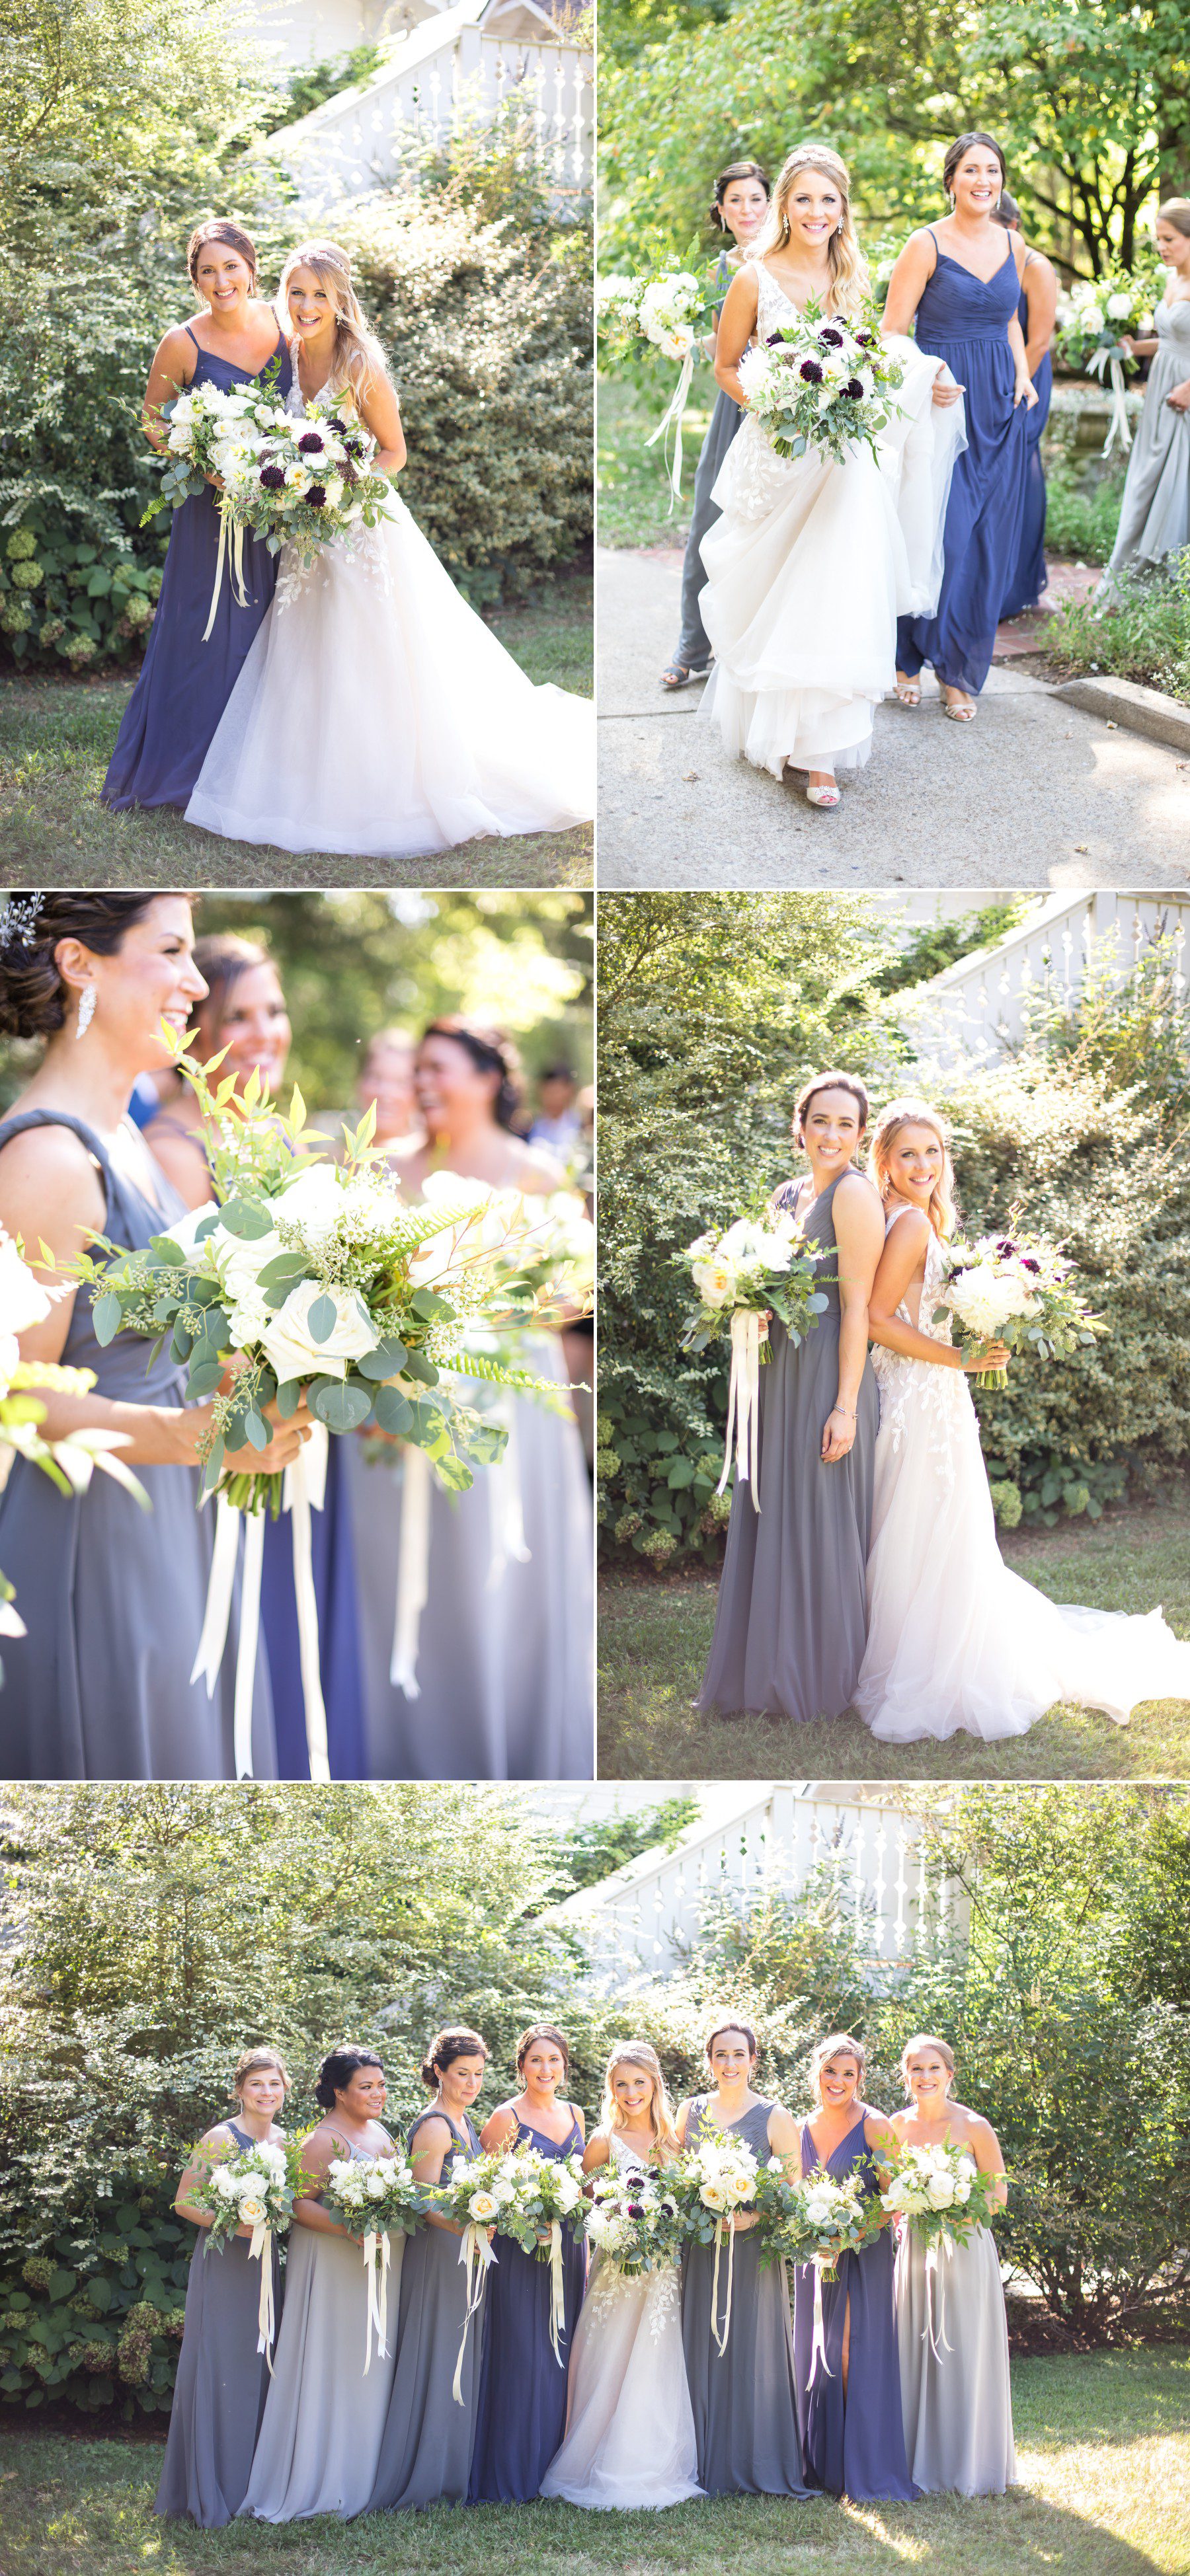 candid photos with bridal party outdoors at estate and barn venue before wedding